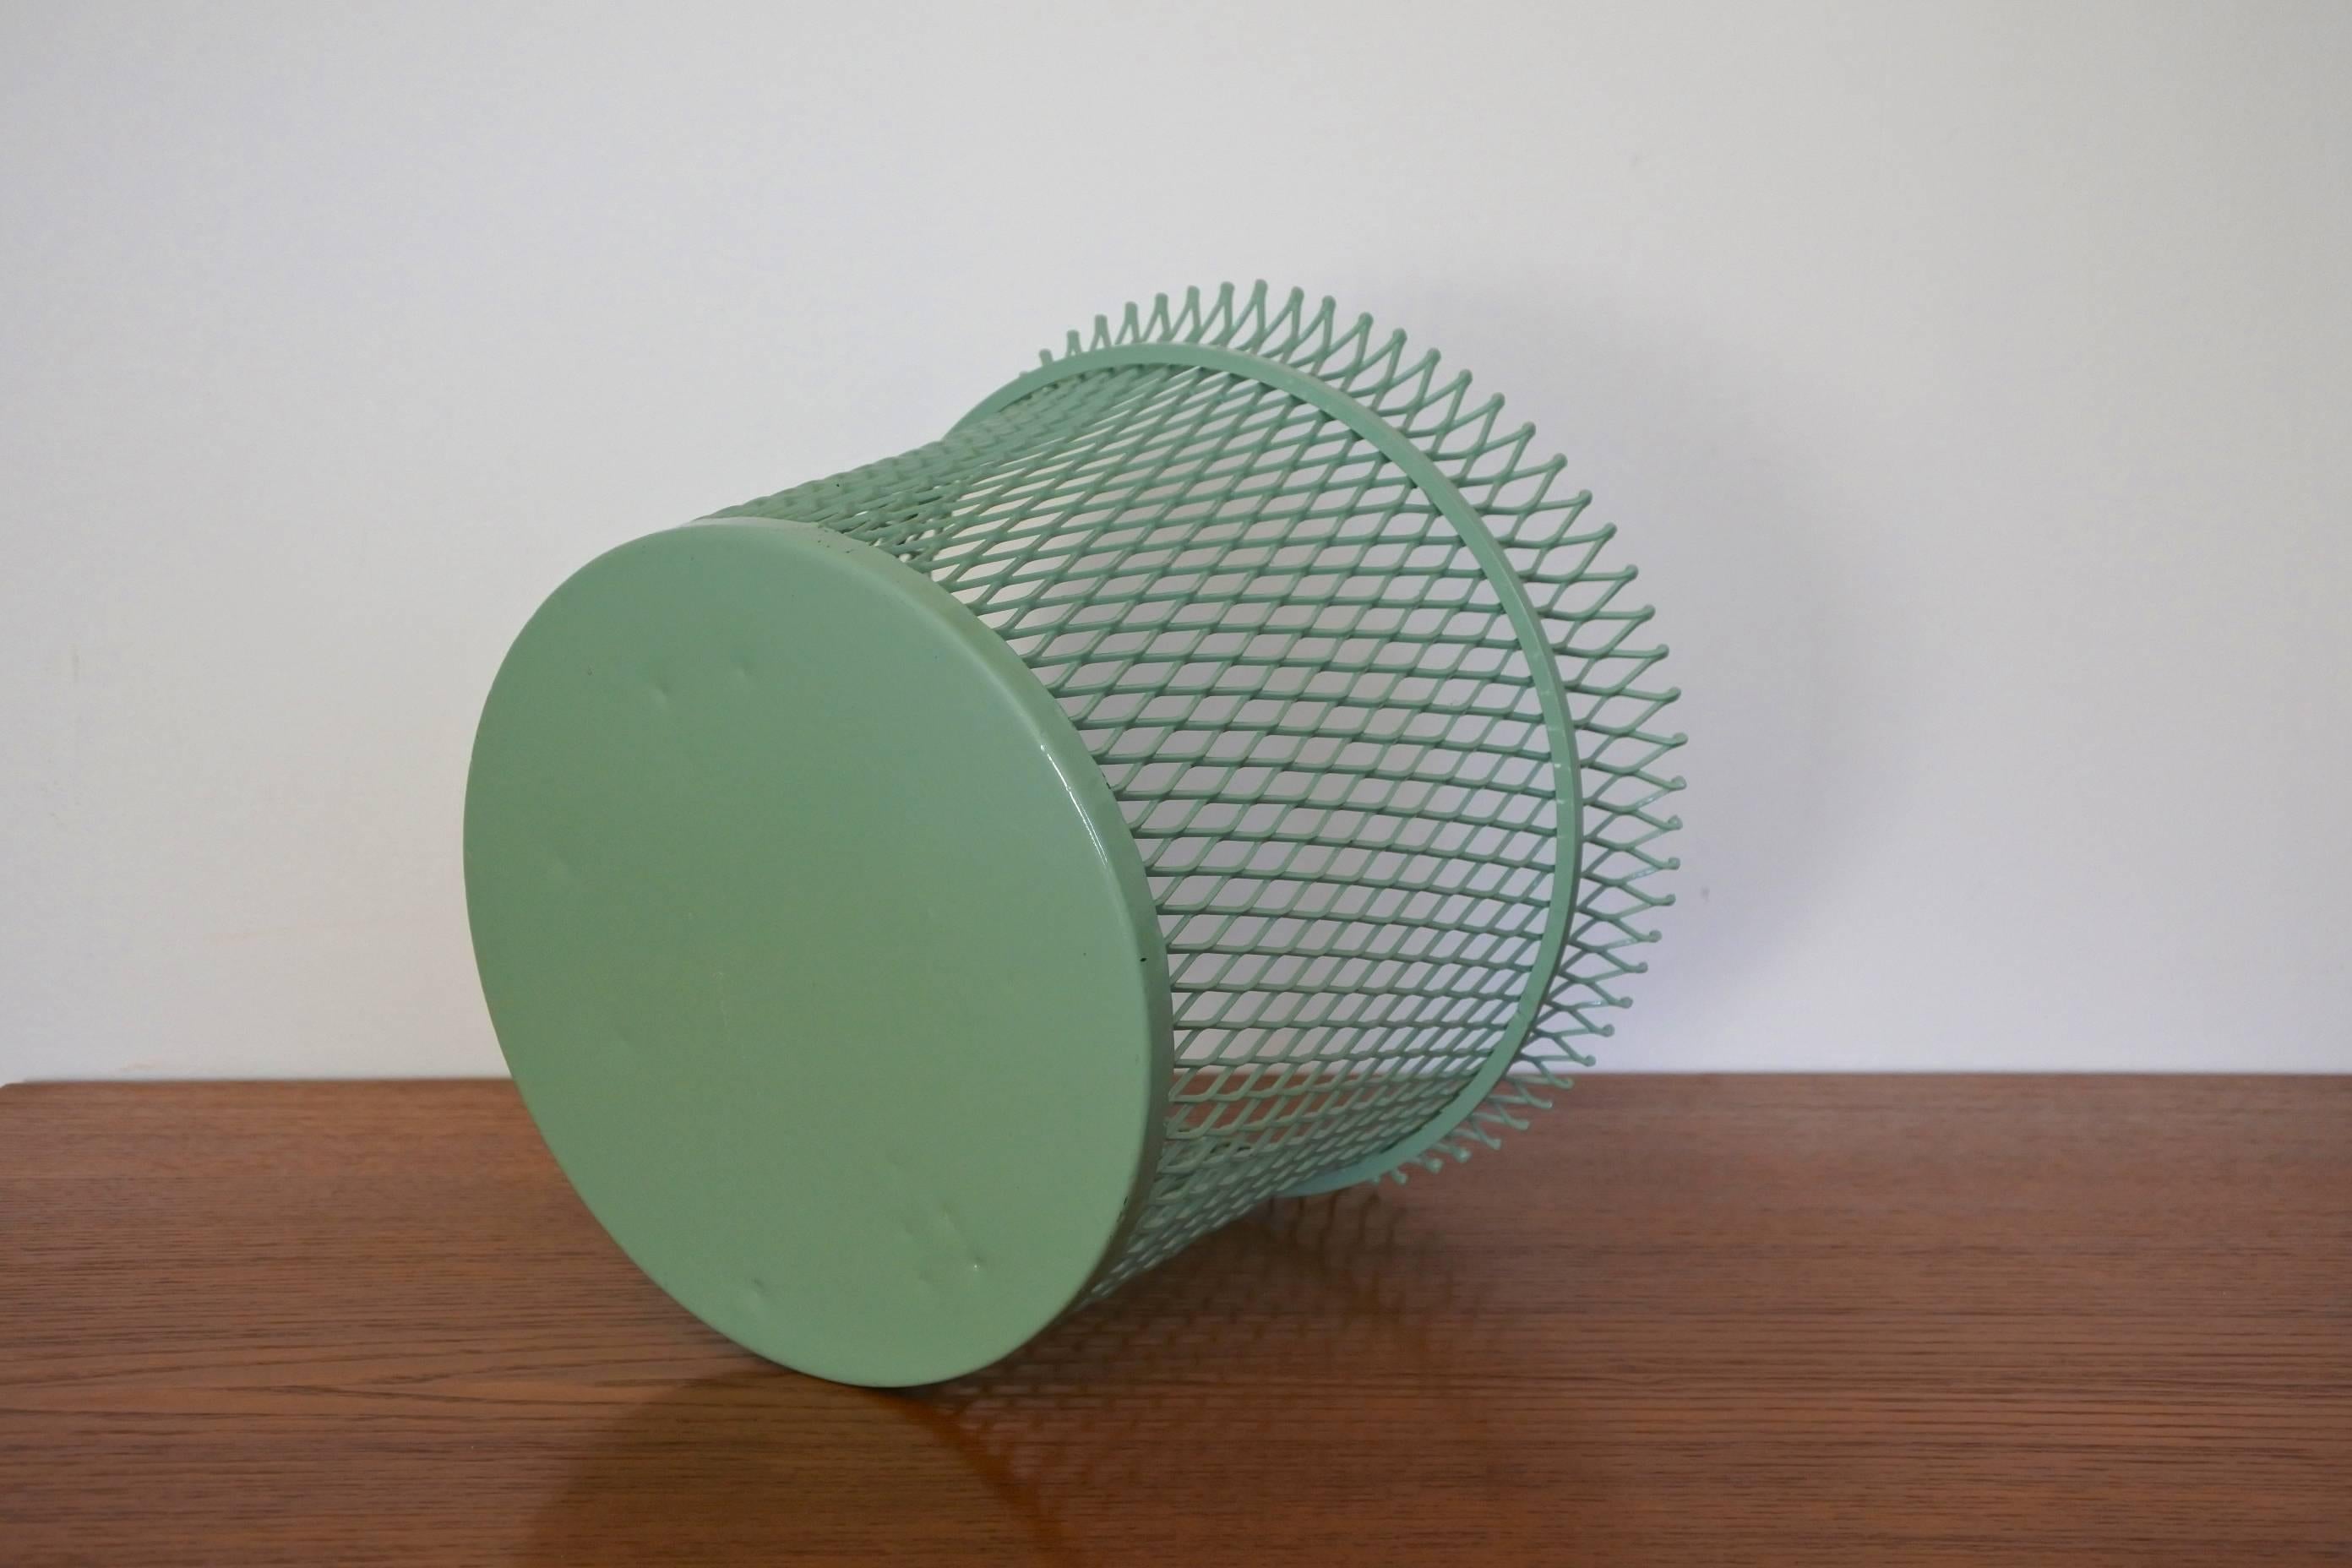 Midcentury wastepaper basket by French designer Mathieu Mategot.
Green lacquered metal.
It is documented in the book 